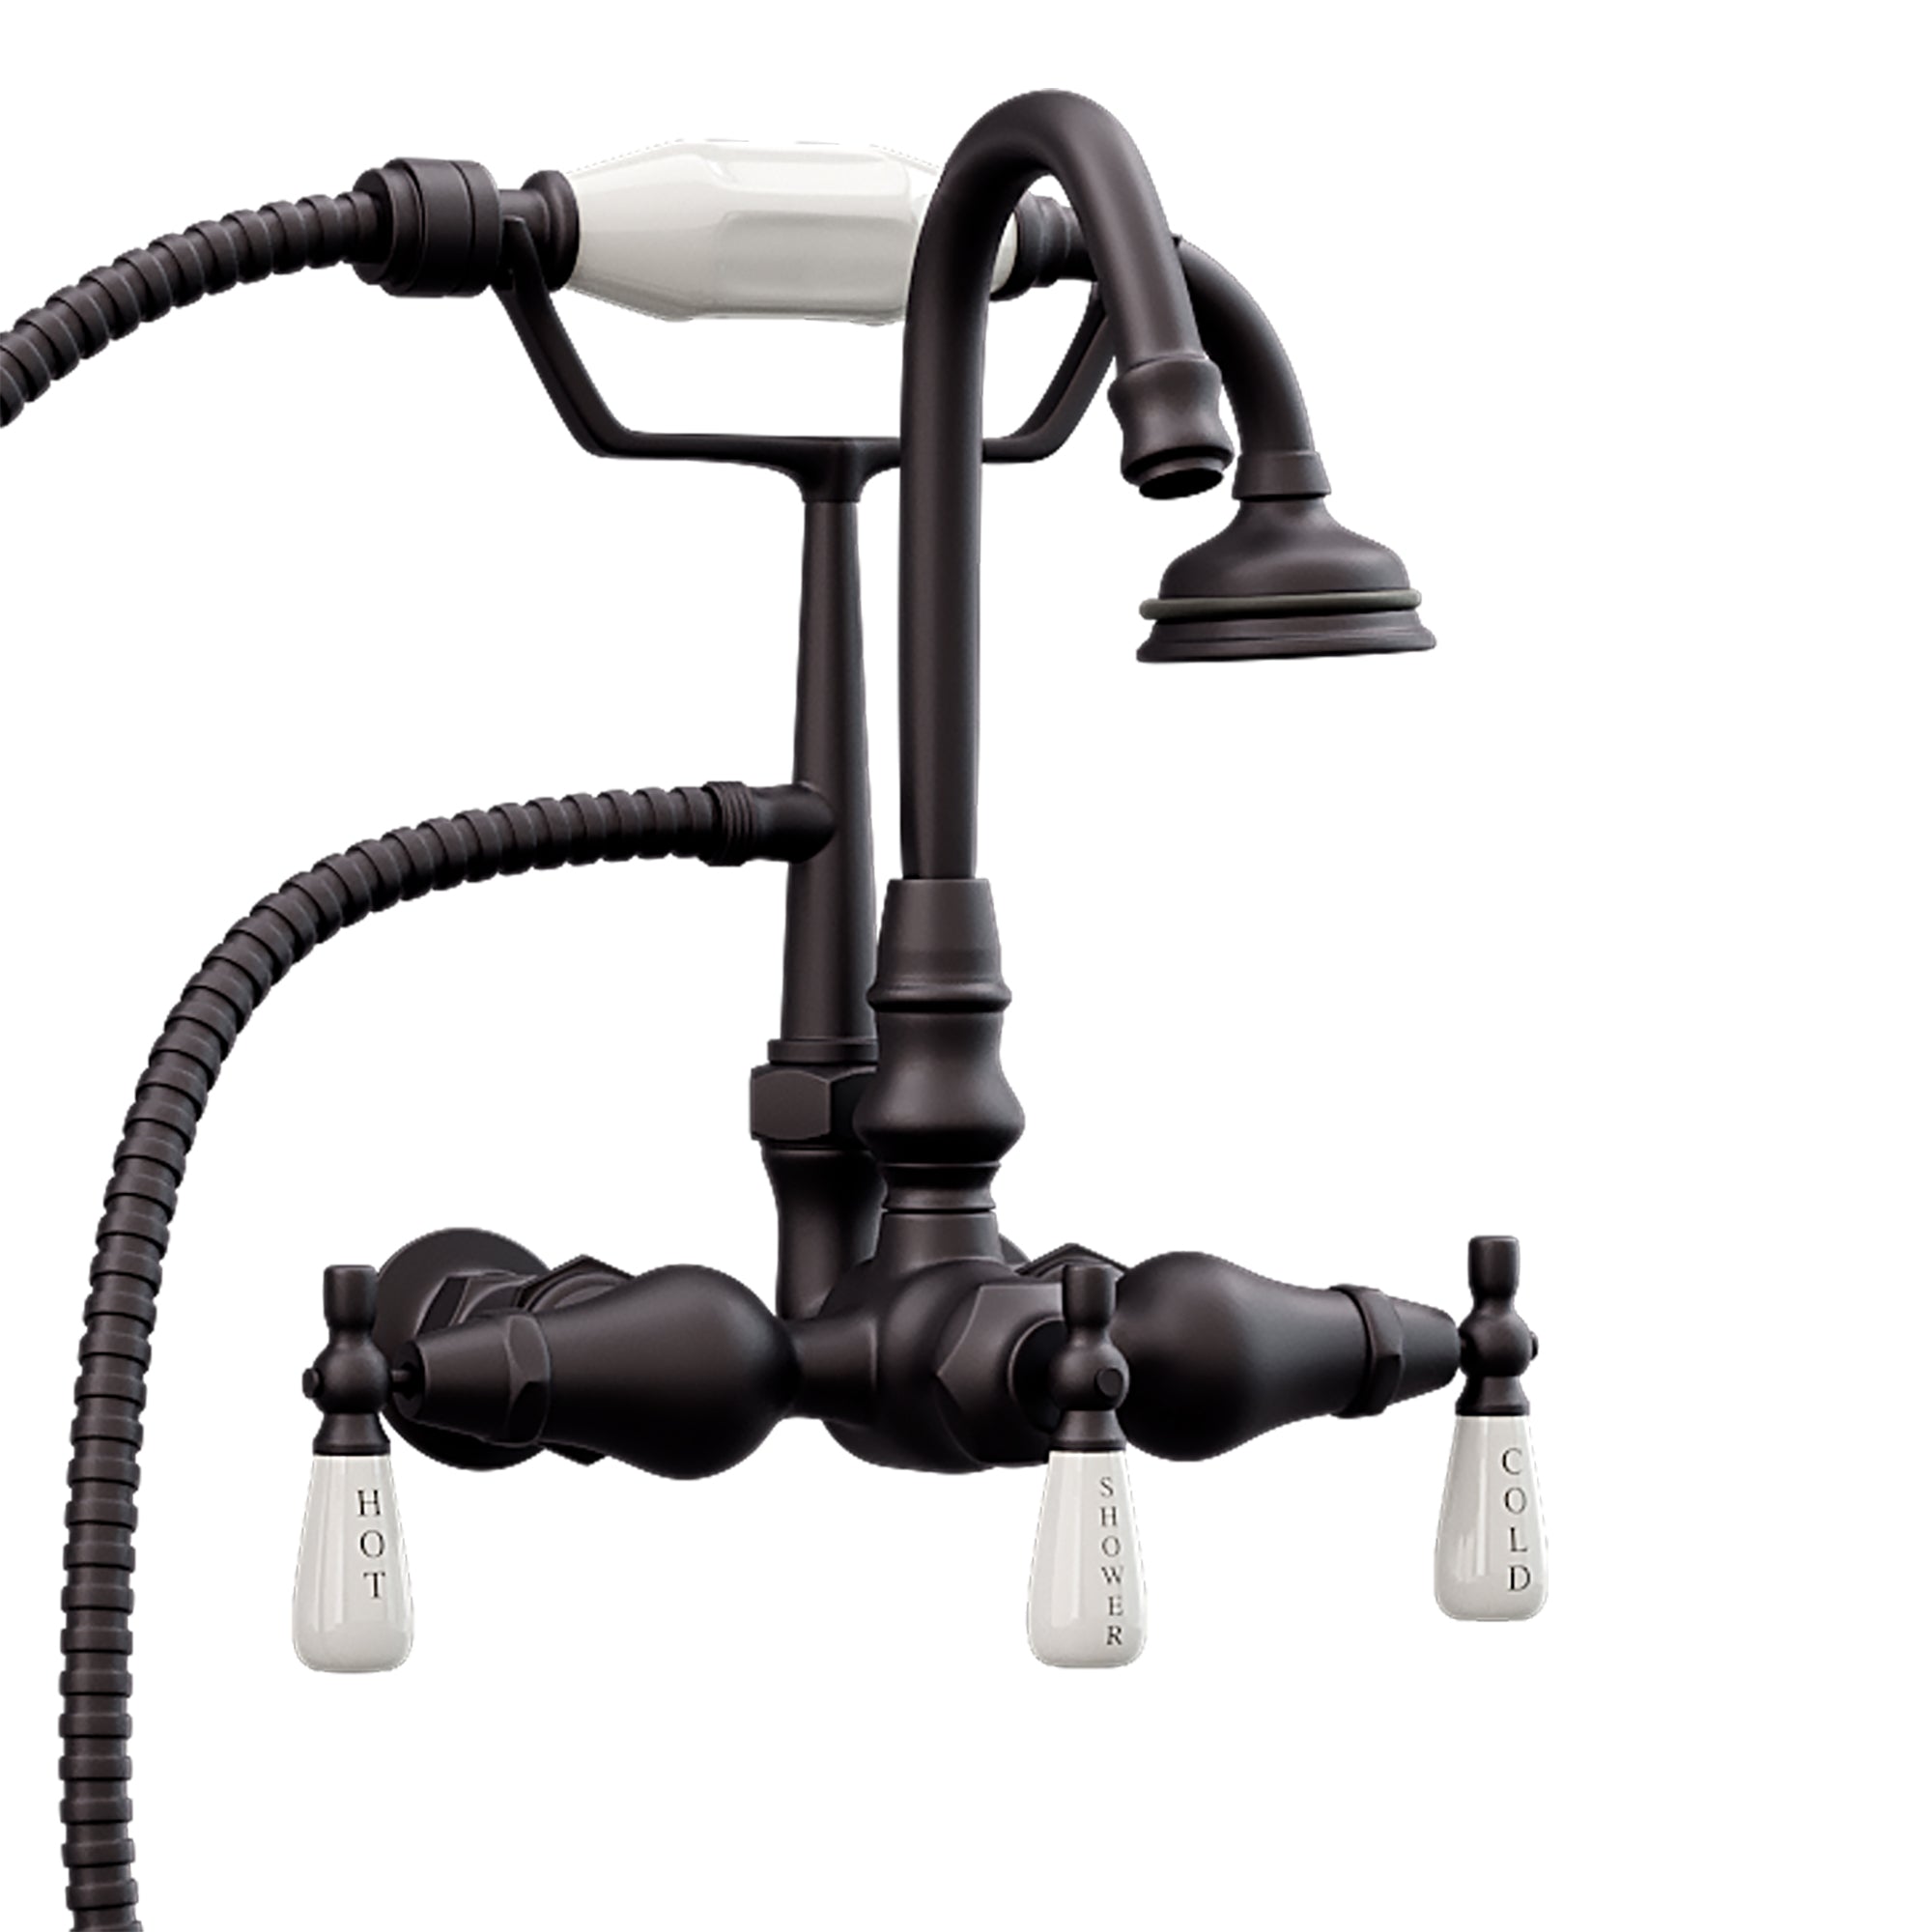 Cambridge Plumbing CAM684BTW Wall Mount Faucet w/ Hand Held Shower for Clawfoot Tub